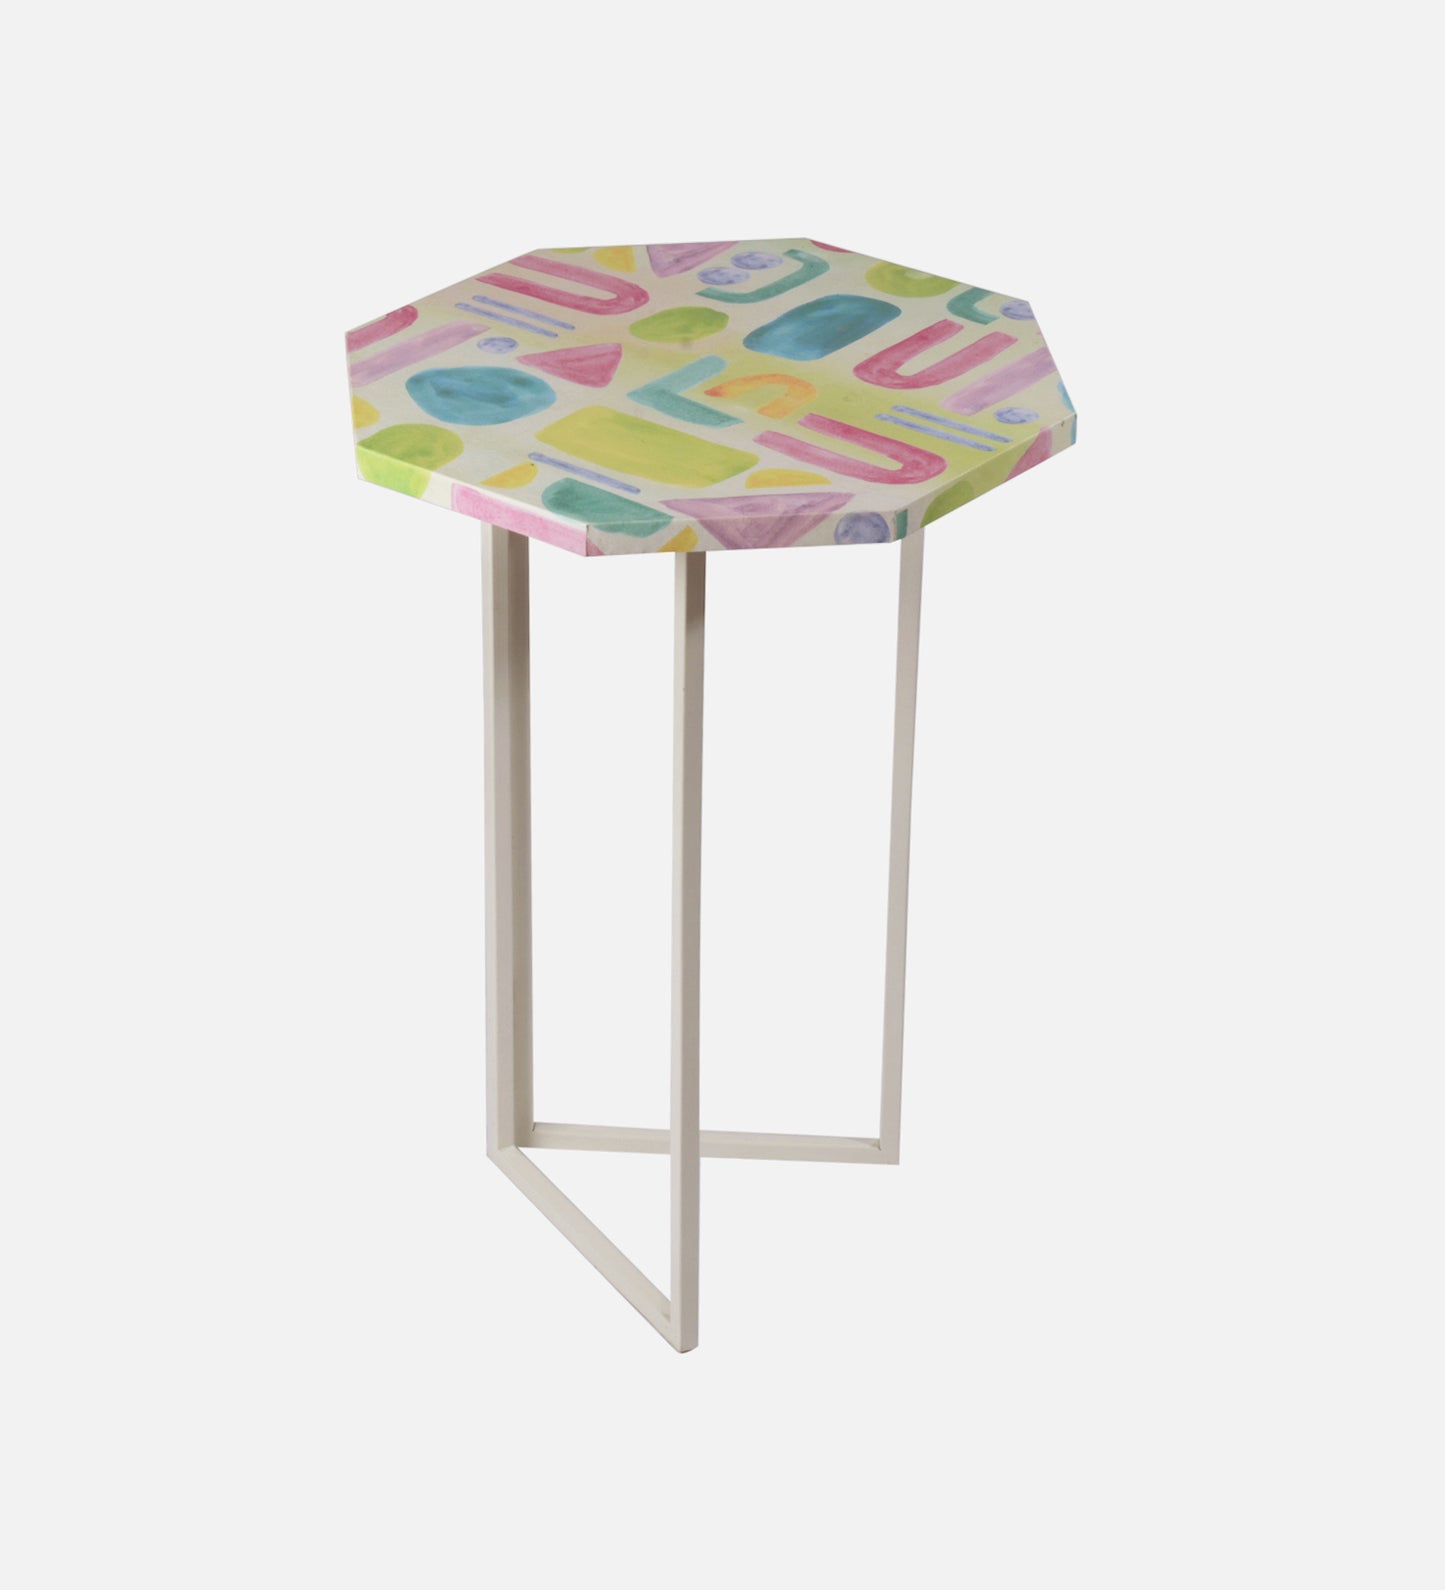 Tiny Doodles Octagon Oblique Side Tables, Wooden Tables, Living Room Decor by A Tiny Mistake